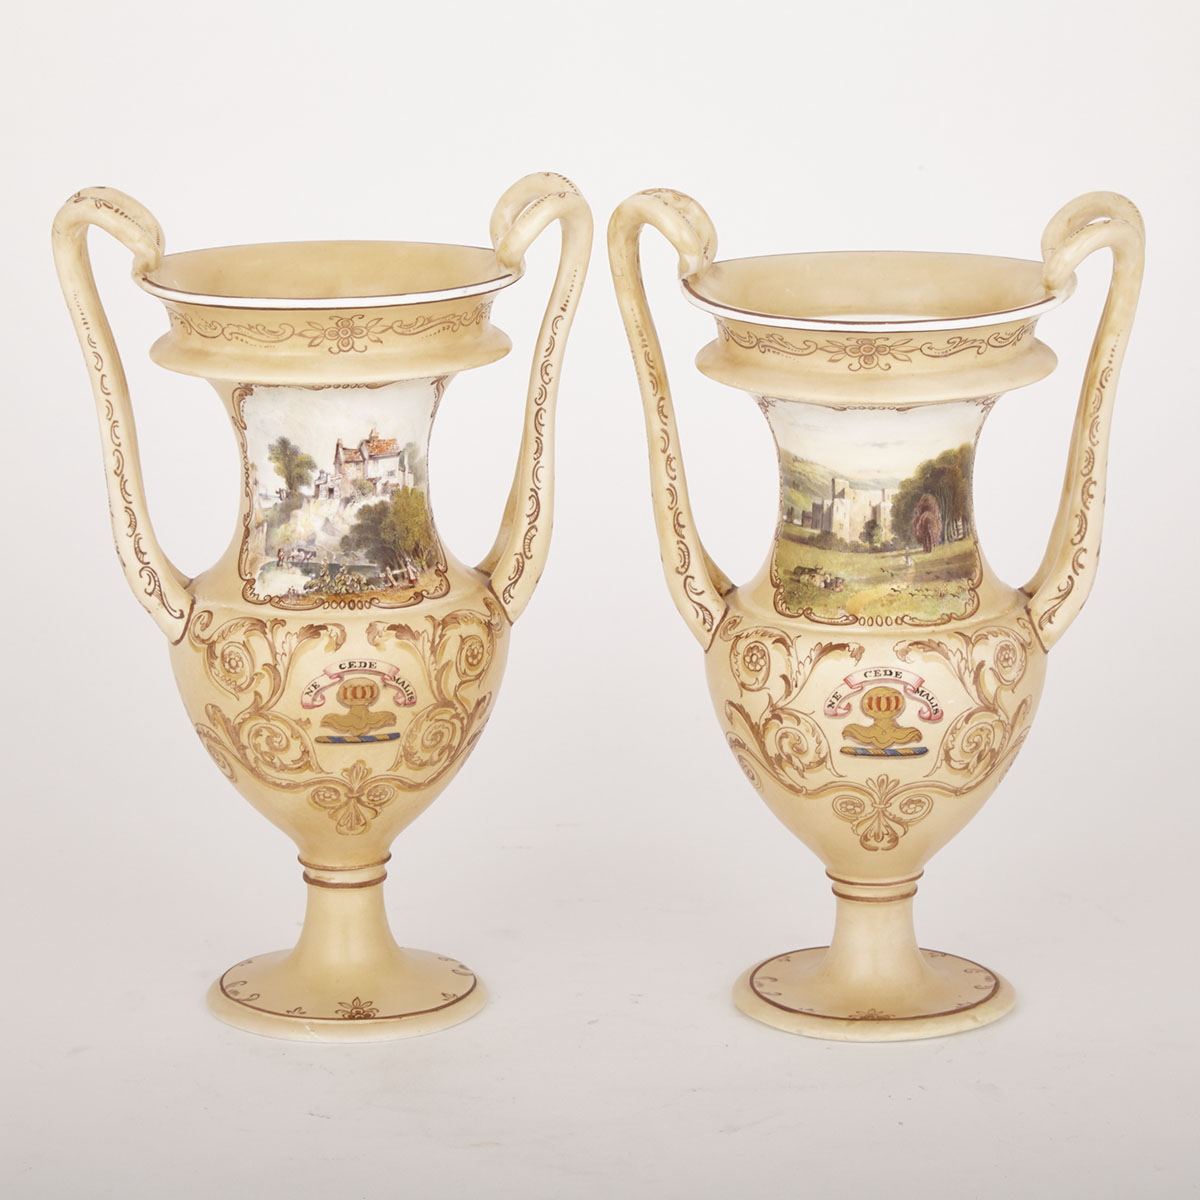 Pair of Spode Armorial Two-Handled Vases, c.1830